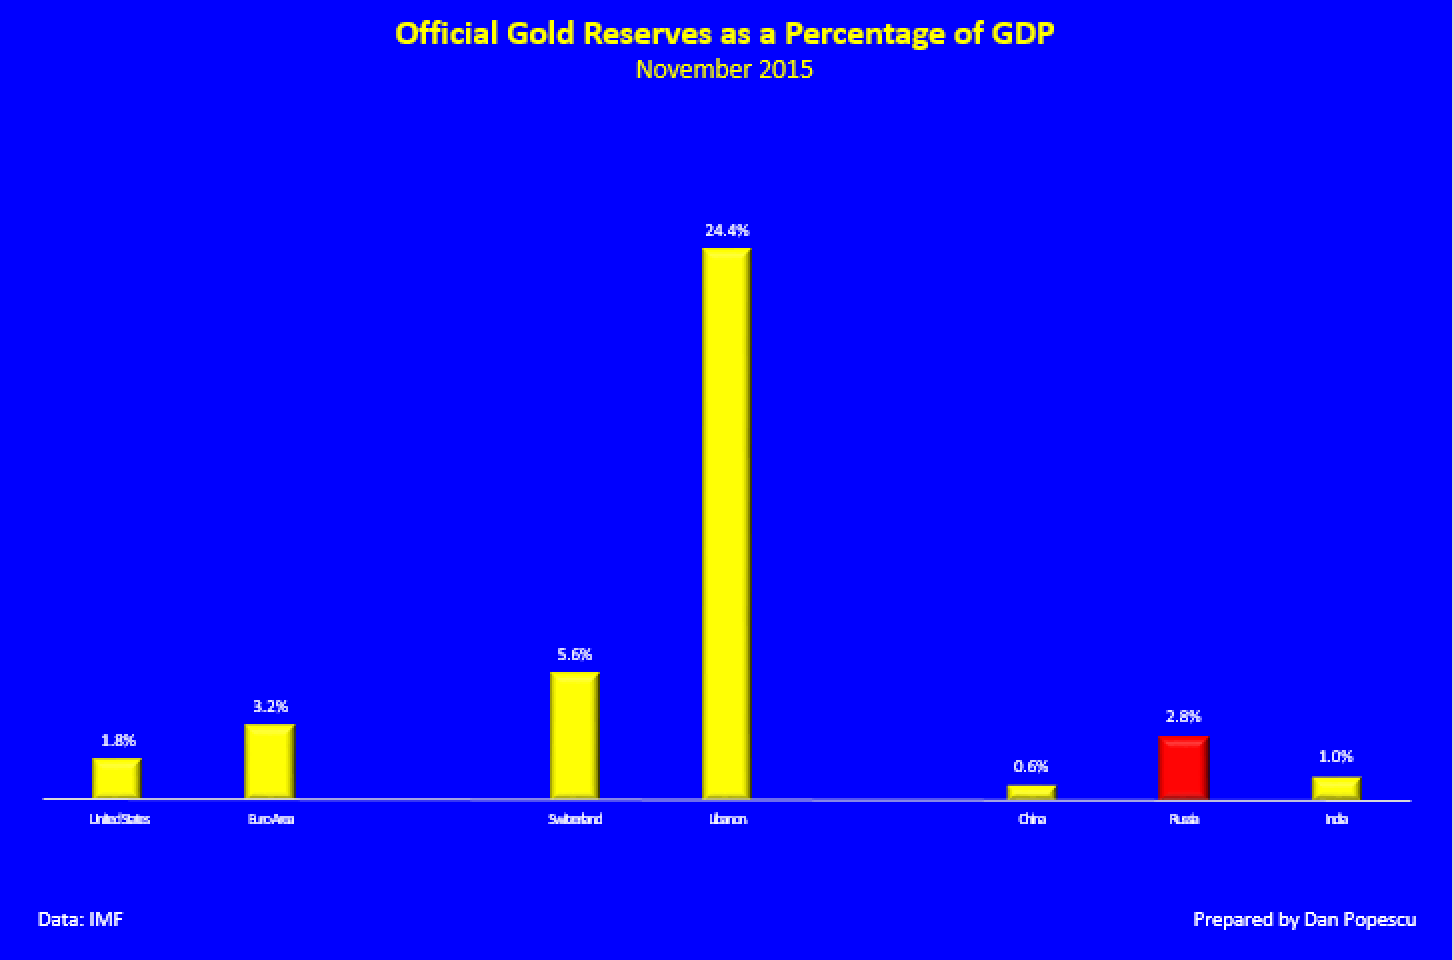 Official gold reserves as a percentage of GDP